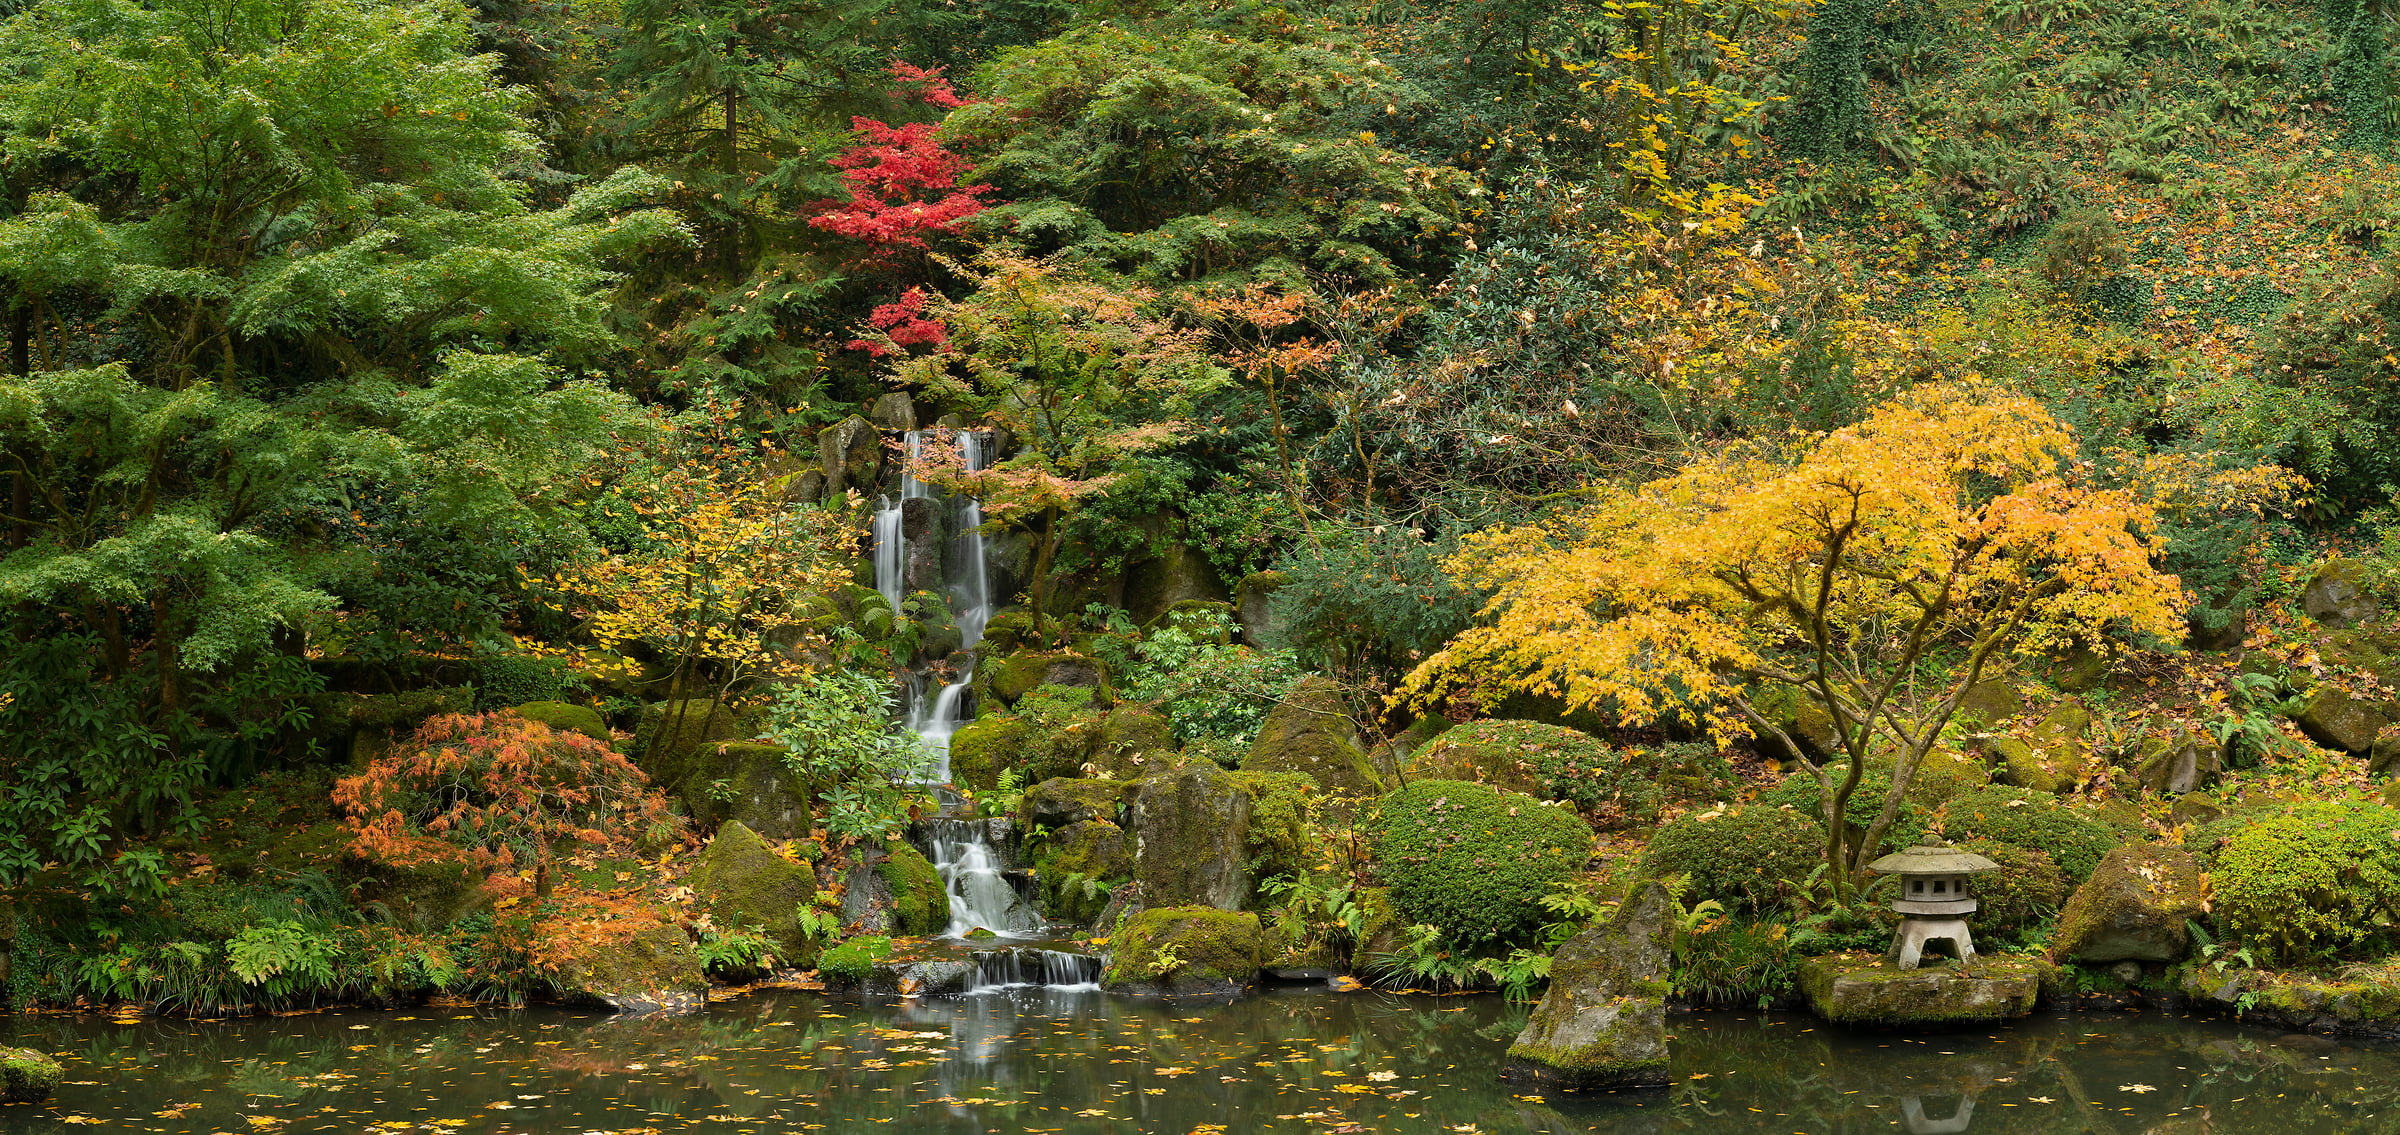 361 megapixels! A very high resolution, large-format VAST photo print of a beautiful waterfall artwork; photograph created by Greg Probst in Portland Japanese Garden, Portland, Oregon